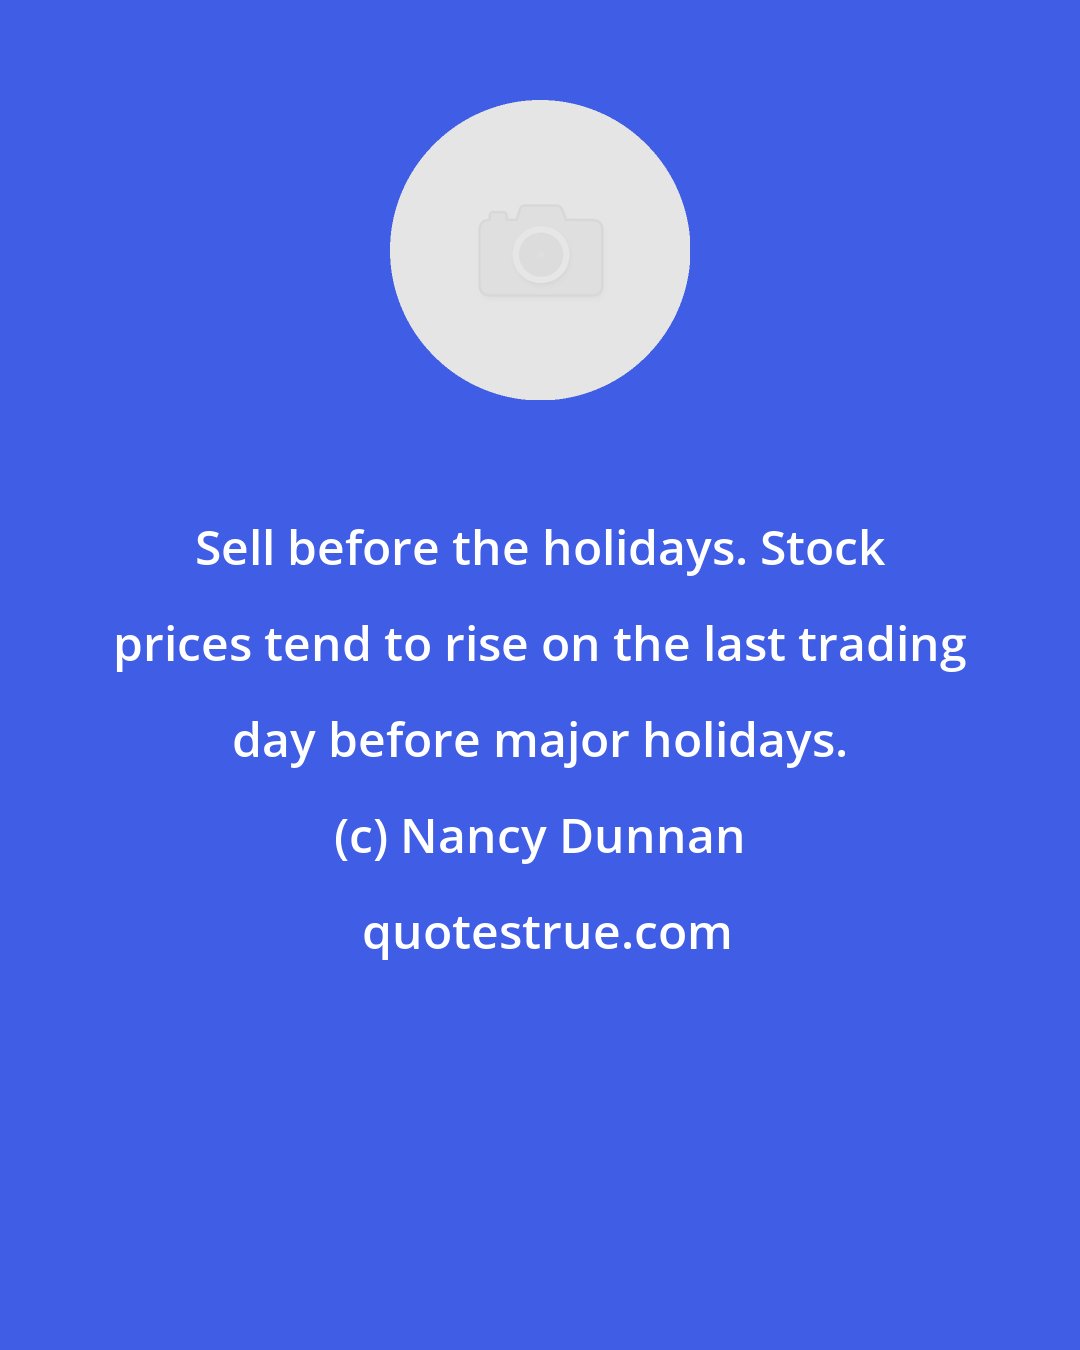 Nancy Dunnan: Sell before the holidays. Stock prices tend to rise on the last trading day before major holidays.